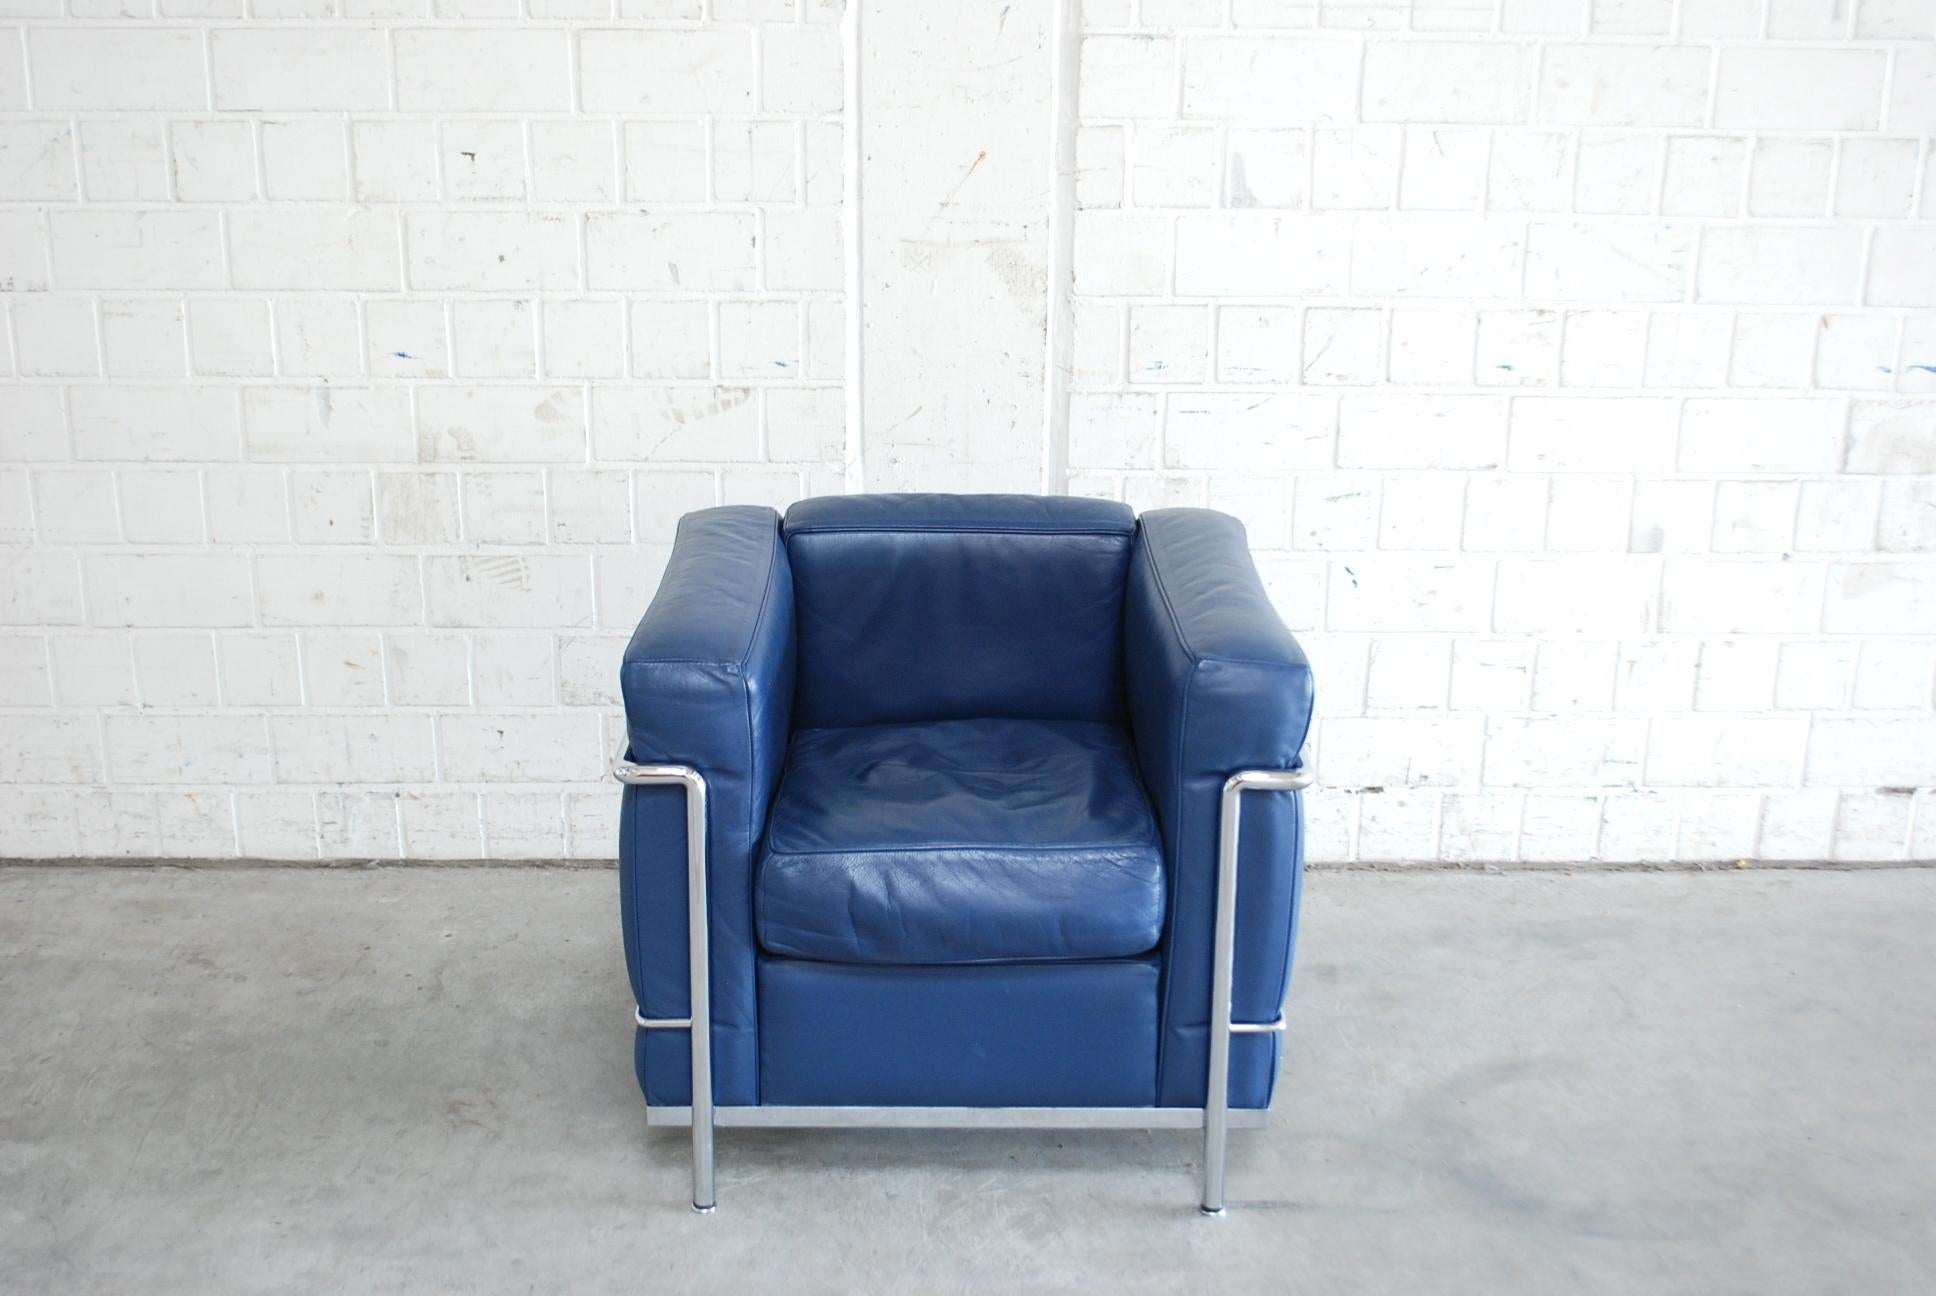 This LC2 armchair in blue leather was designed by Le Corbusier/ Pierre Jeanneret/ Charlotte Perriand and produced by Cassina.
It features the classic chrome steel frame.